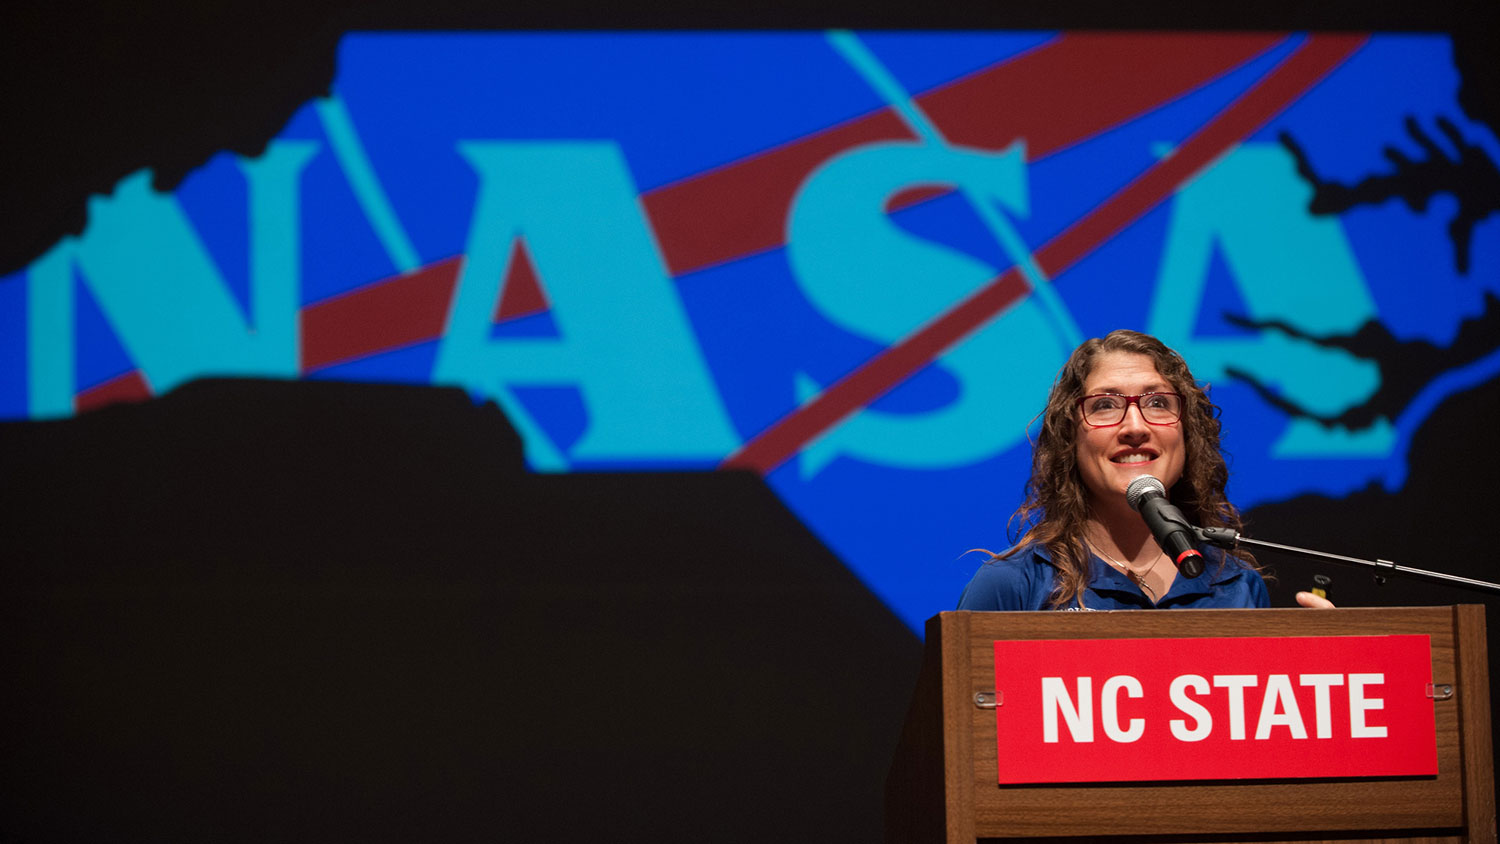 Astronaut Christina Koch delivering a talk at NC State University